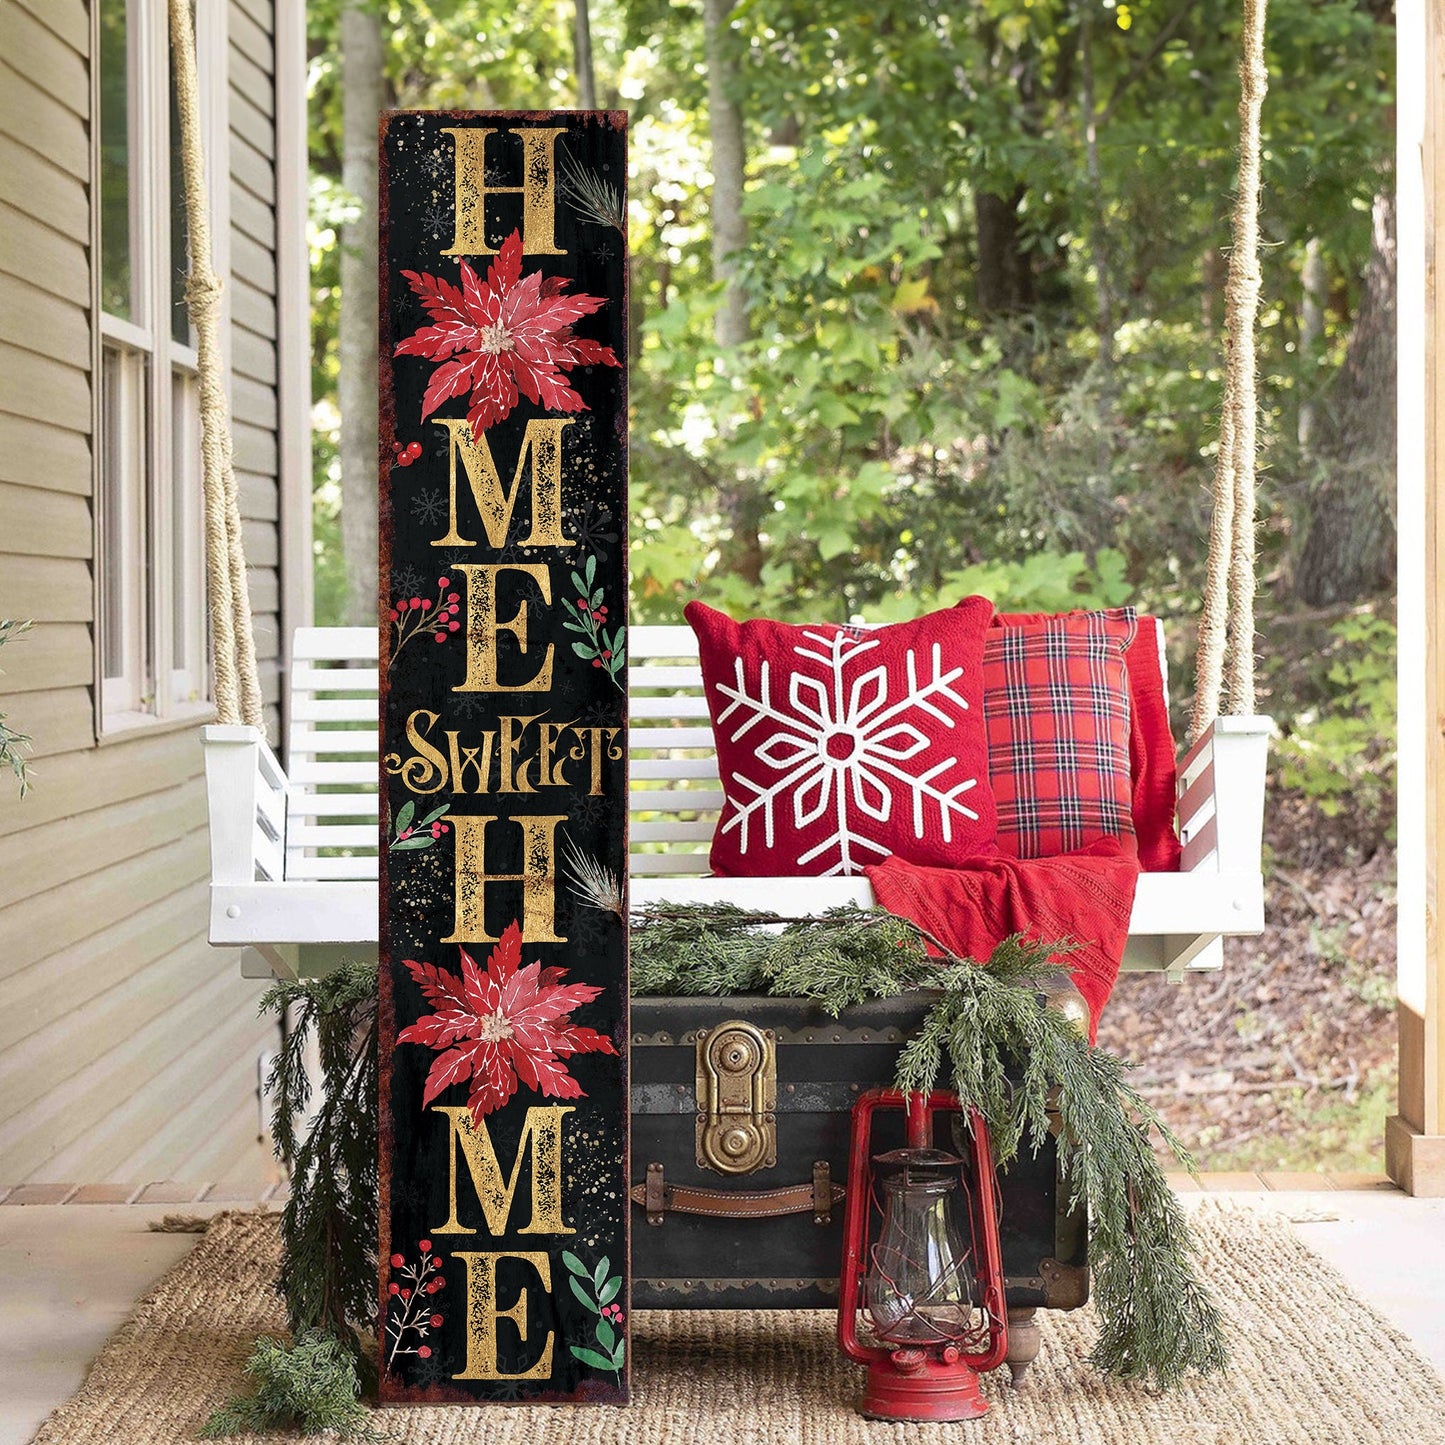 48in "Home Sweet Home" Christmas Porch Sign - Front Porch Christmas Welcome Sign, Rustic Modern Farmhouse Entryway Board